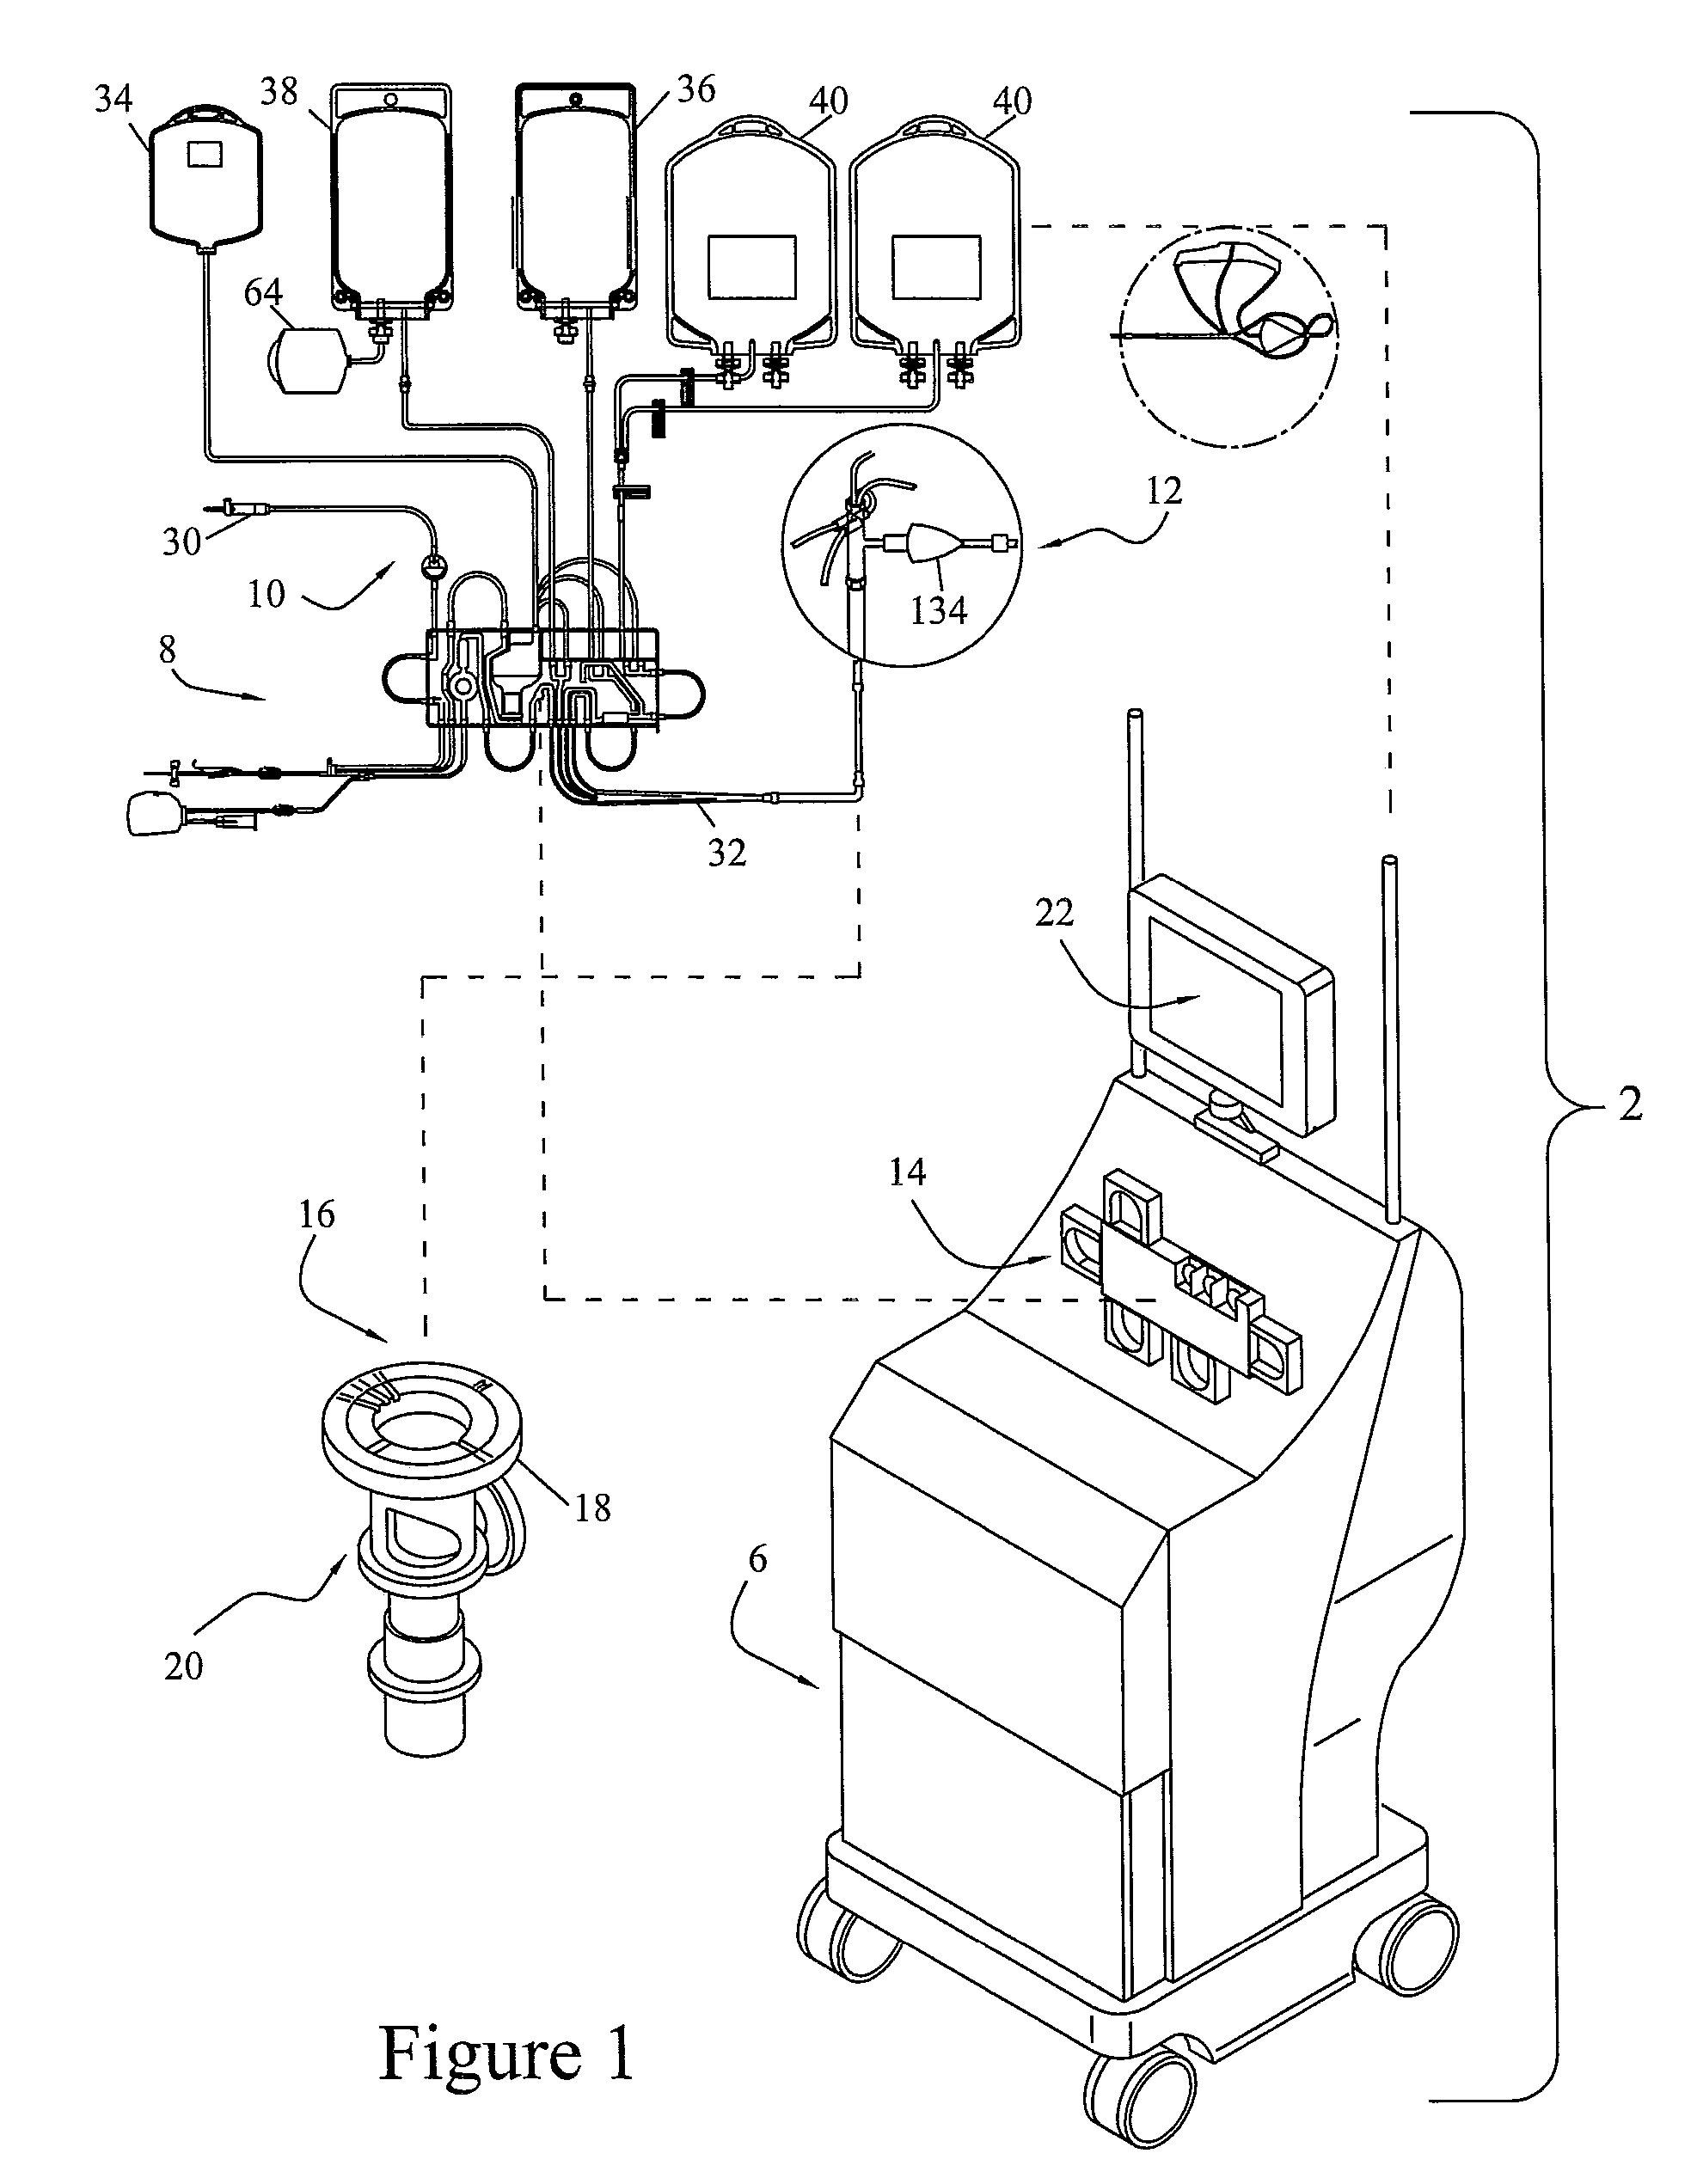 Blood processing apparatus with controlled cell capture chamber trigger